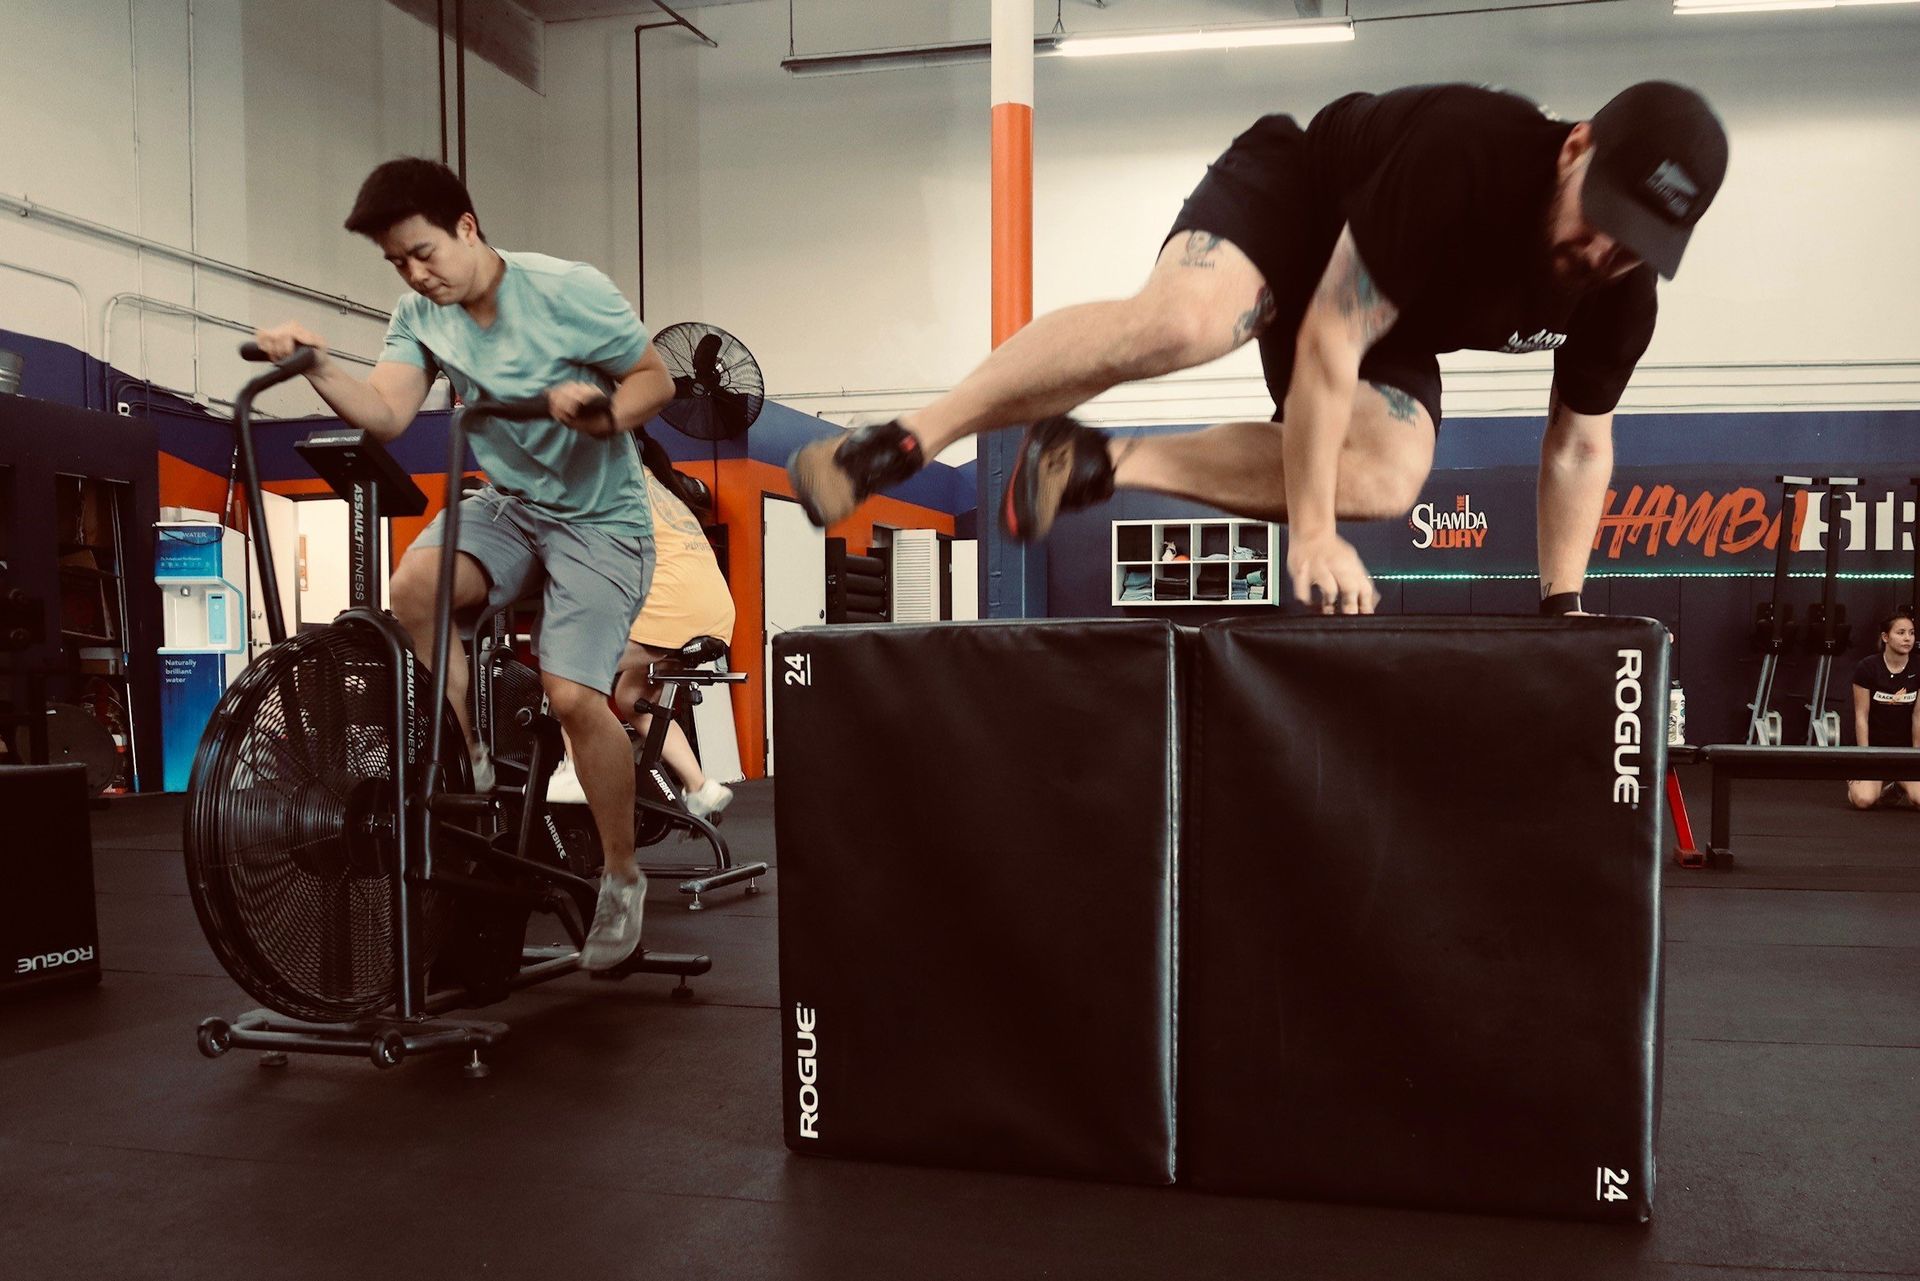 A man is doing a handstand while another man is riding an exercise bike in a gym.